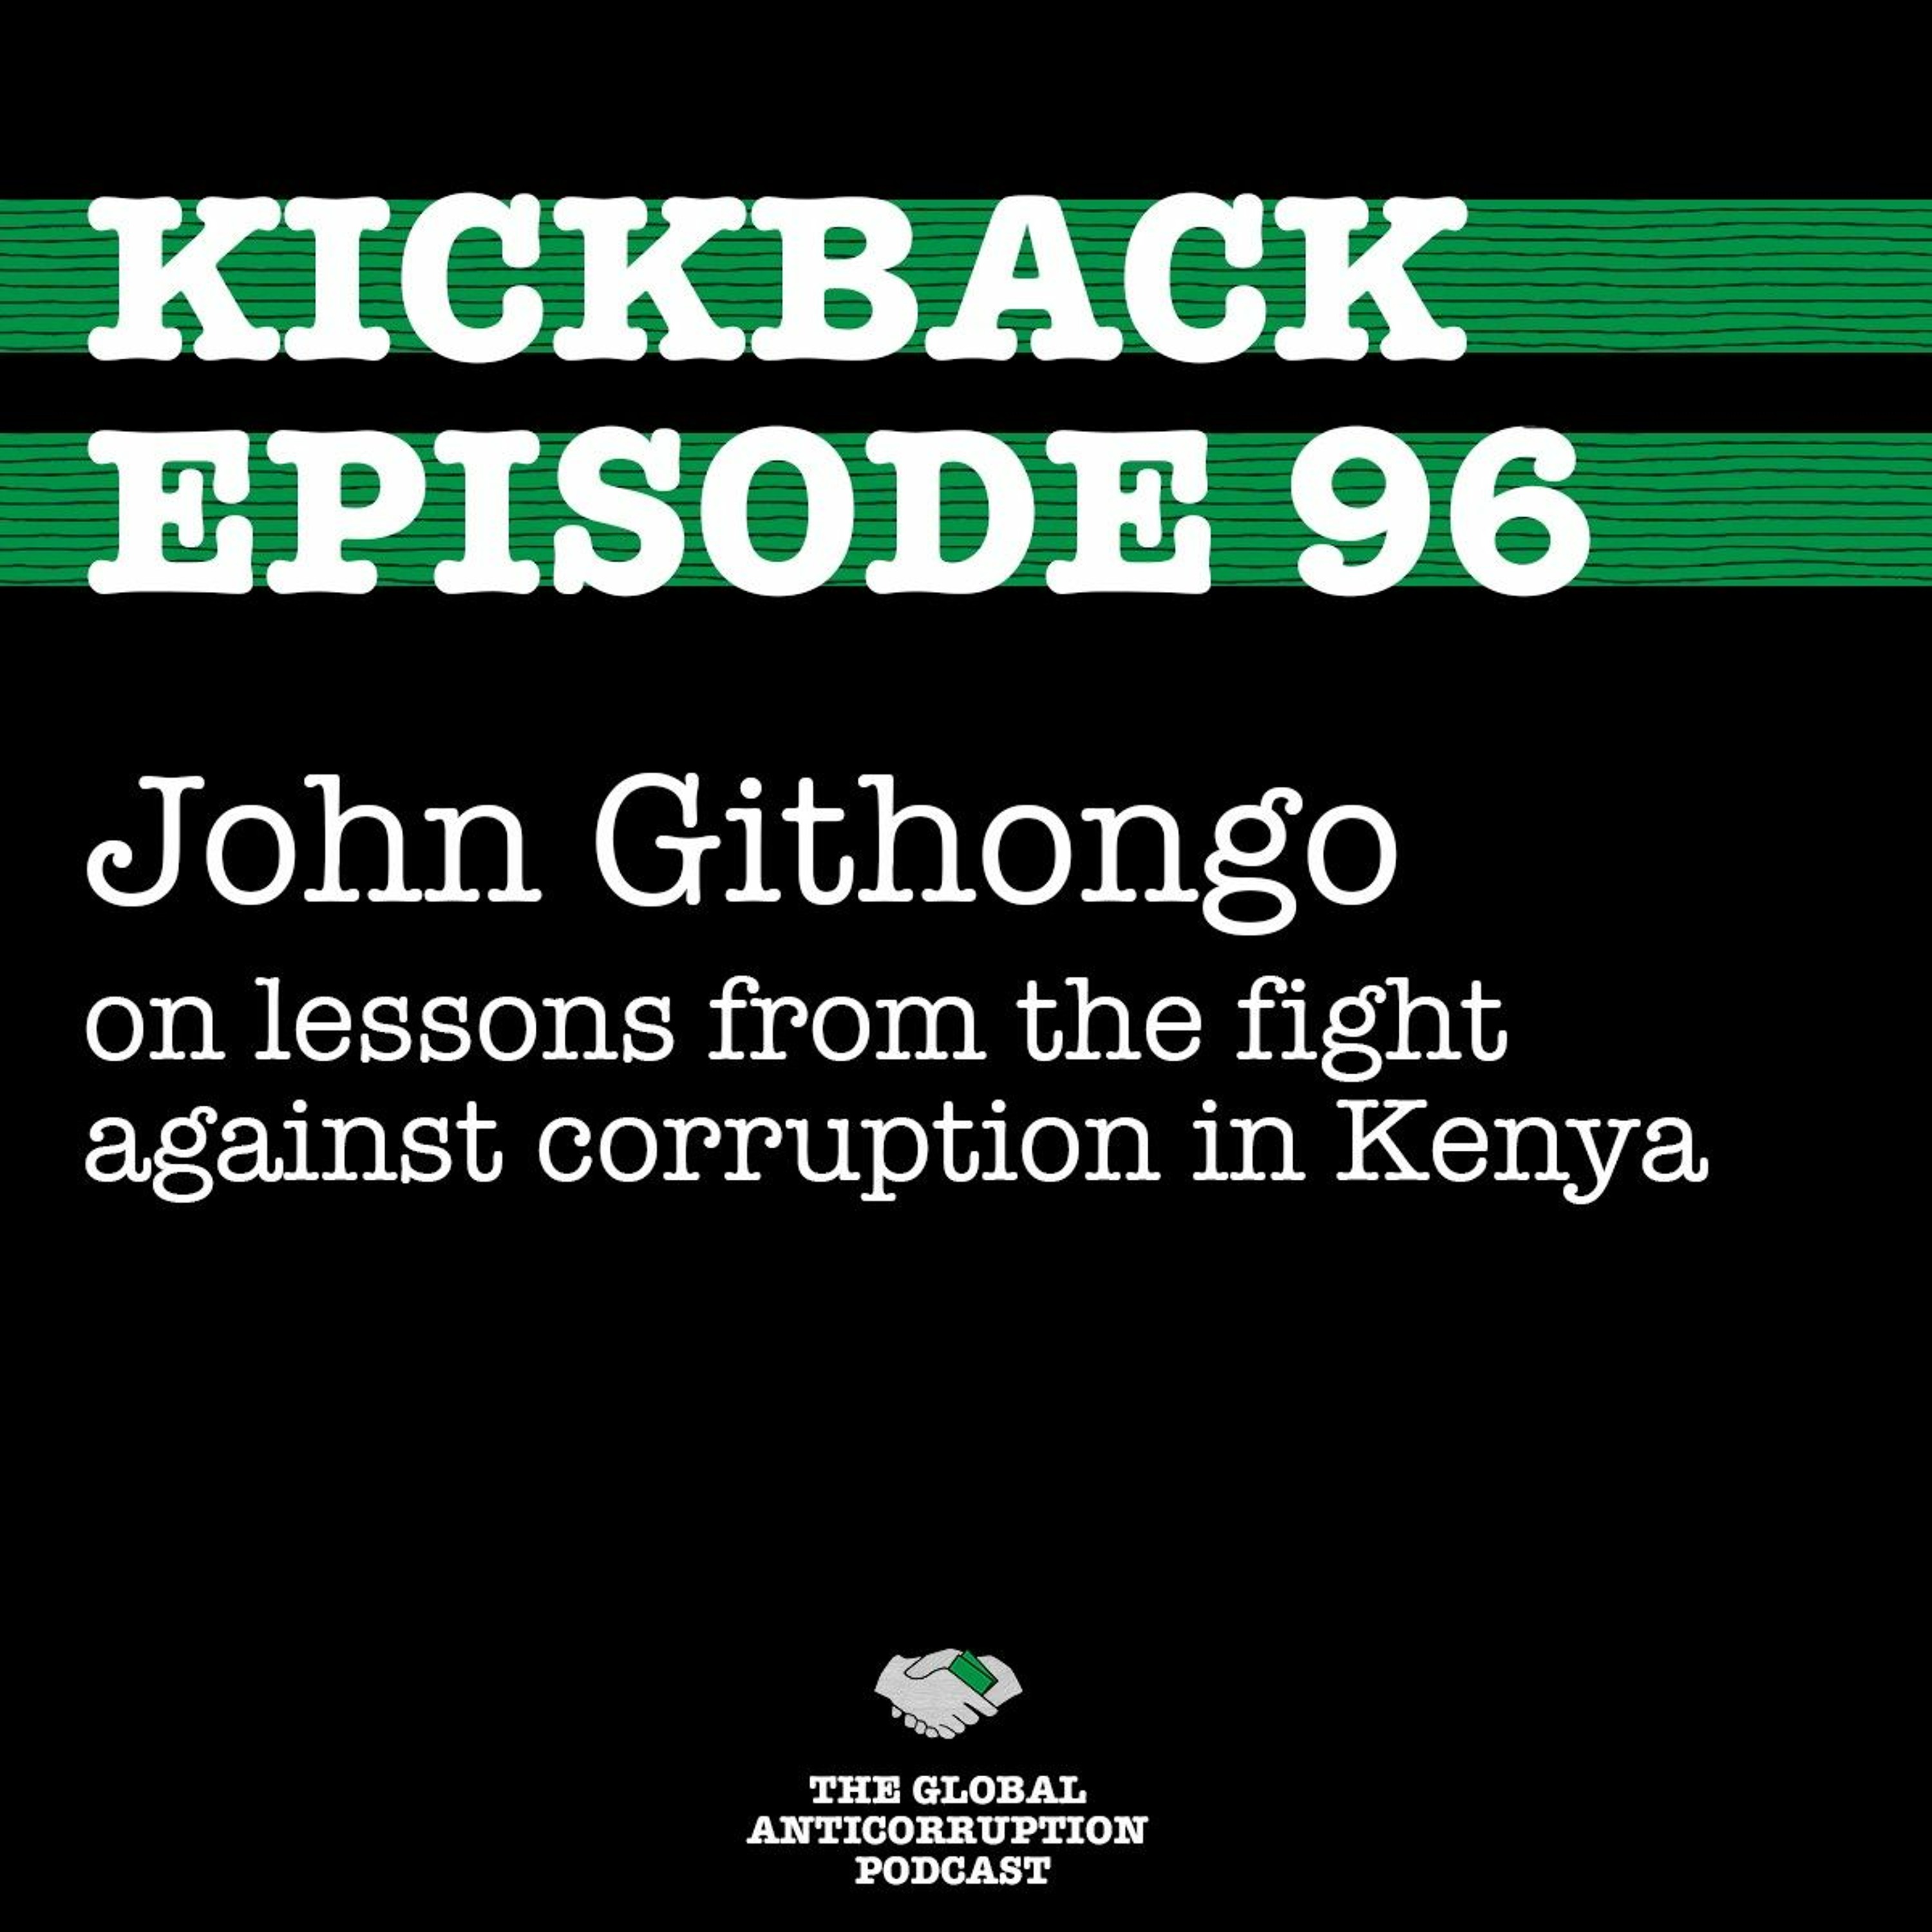 96. John Githongo on lessons from the fight against corruption in Kenya